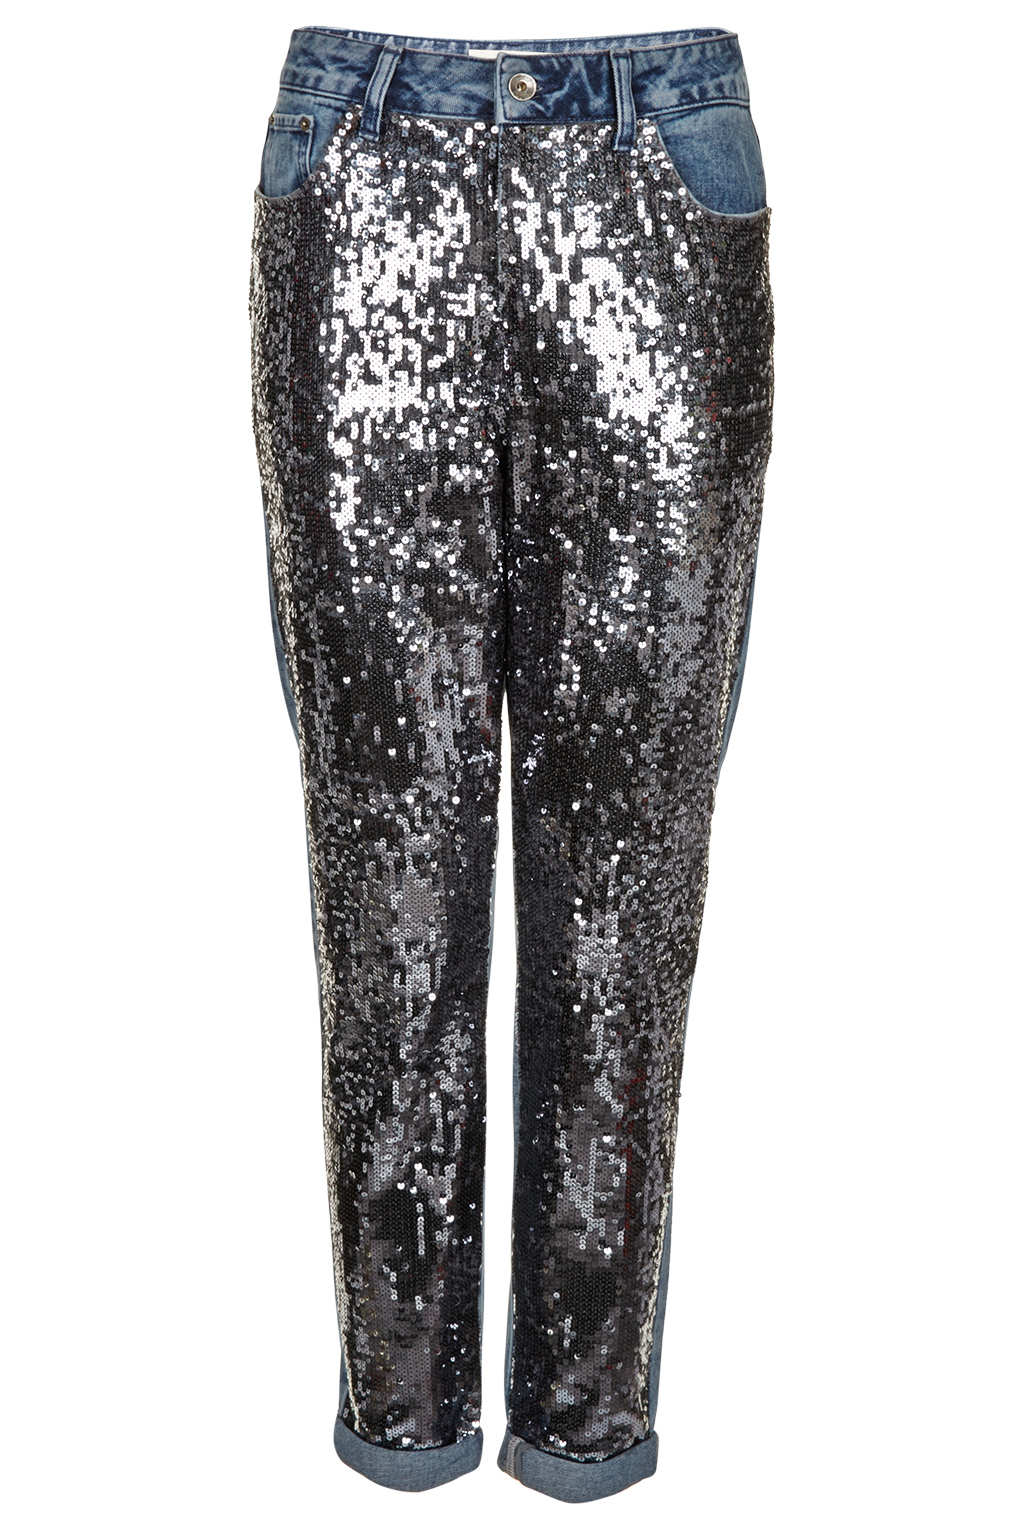 Lyst - Topshop Moto Sequin Mom Jeans in Blue